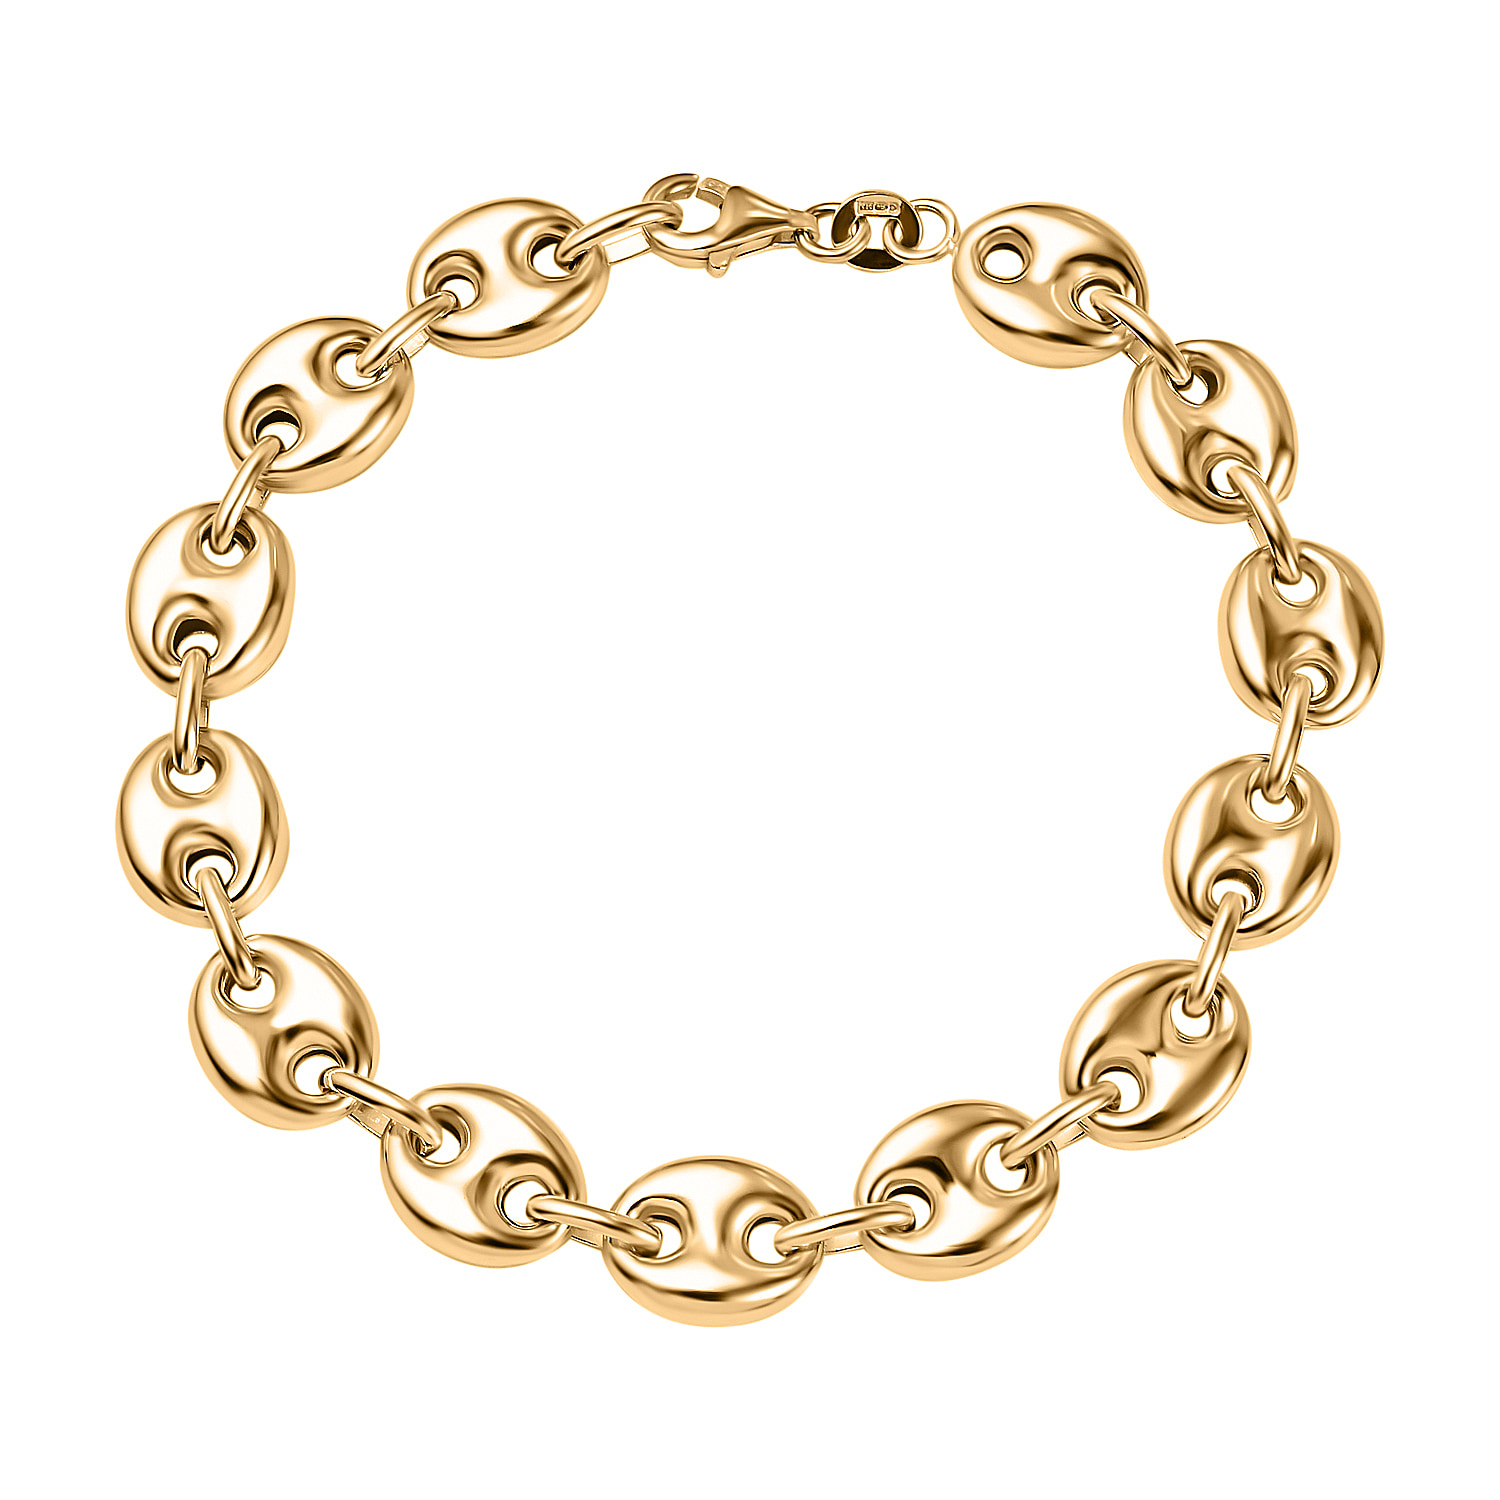 Mariner Bracelet in Yellow Gold Plated Sterling Silver (Size - 7), Silver Wt. 8.90 Gms